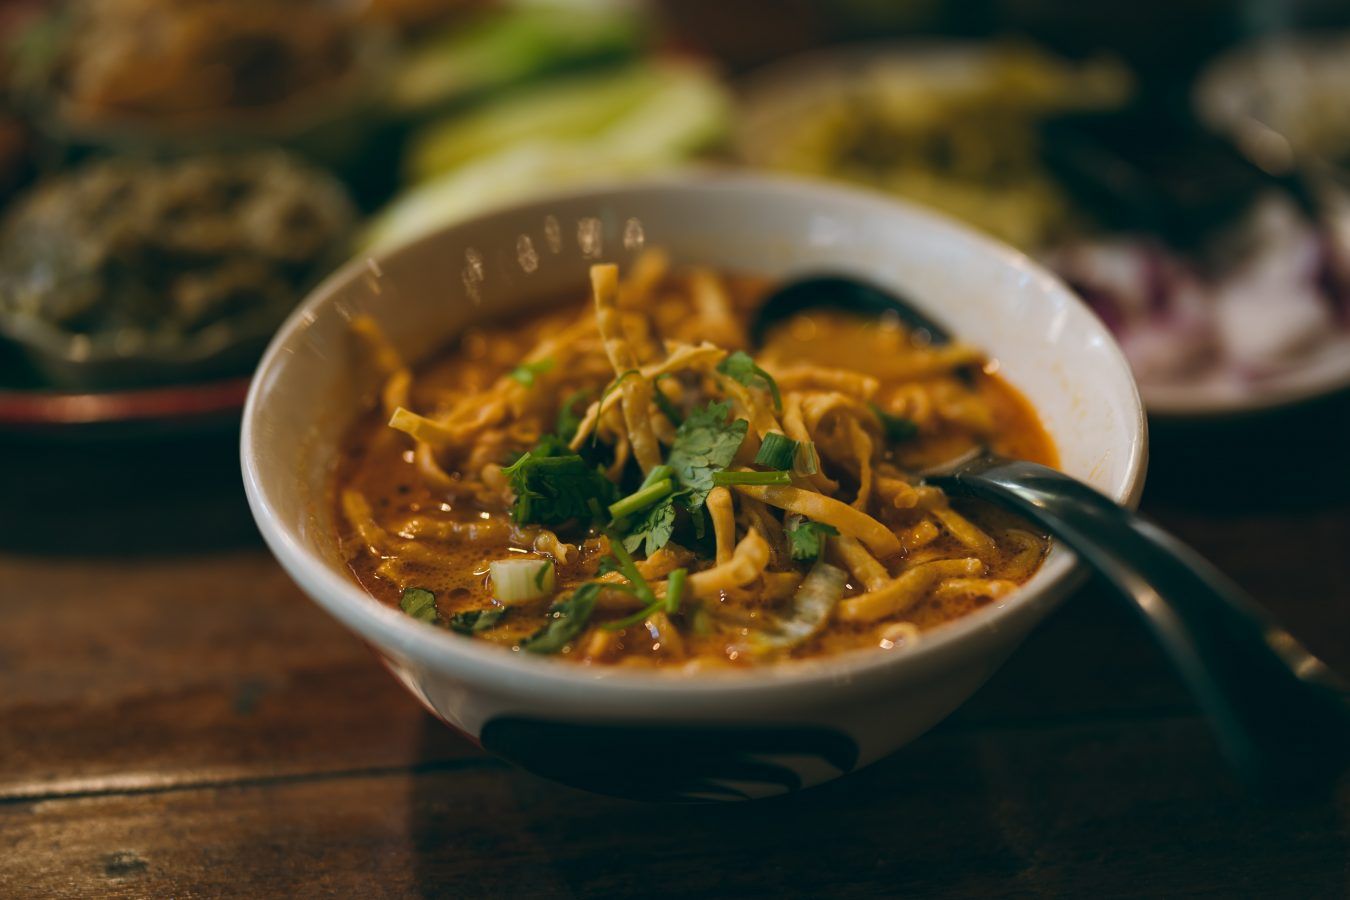 Why everyone is confused by khao soi being named the best soup in the world